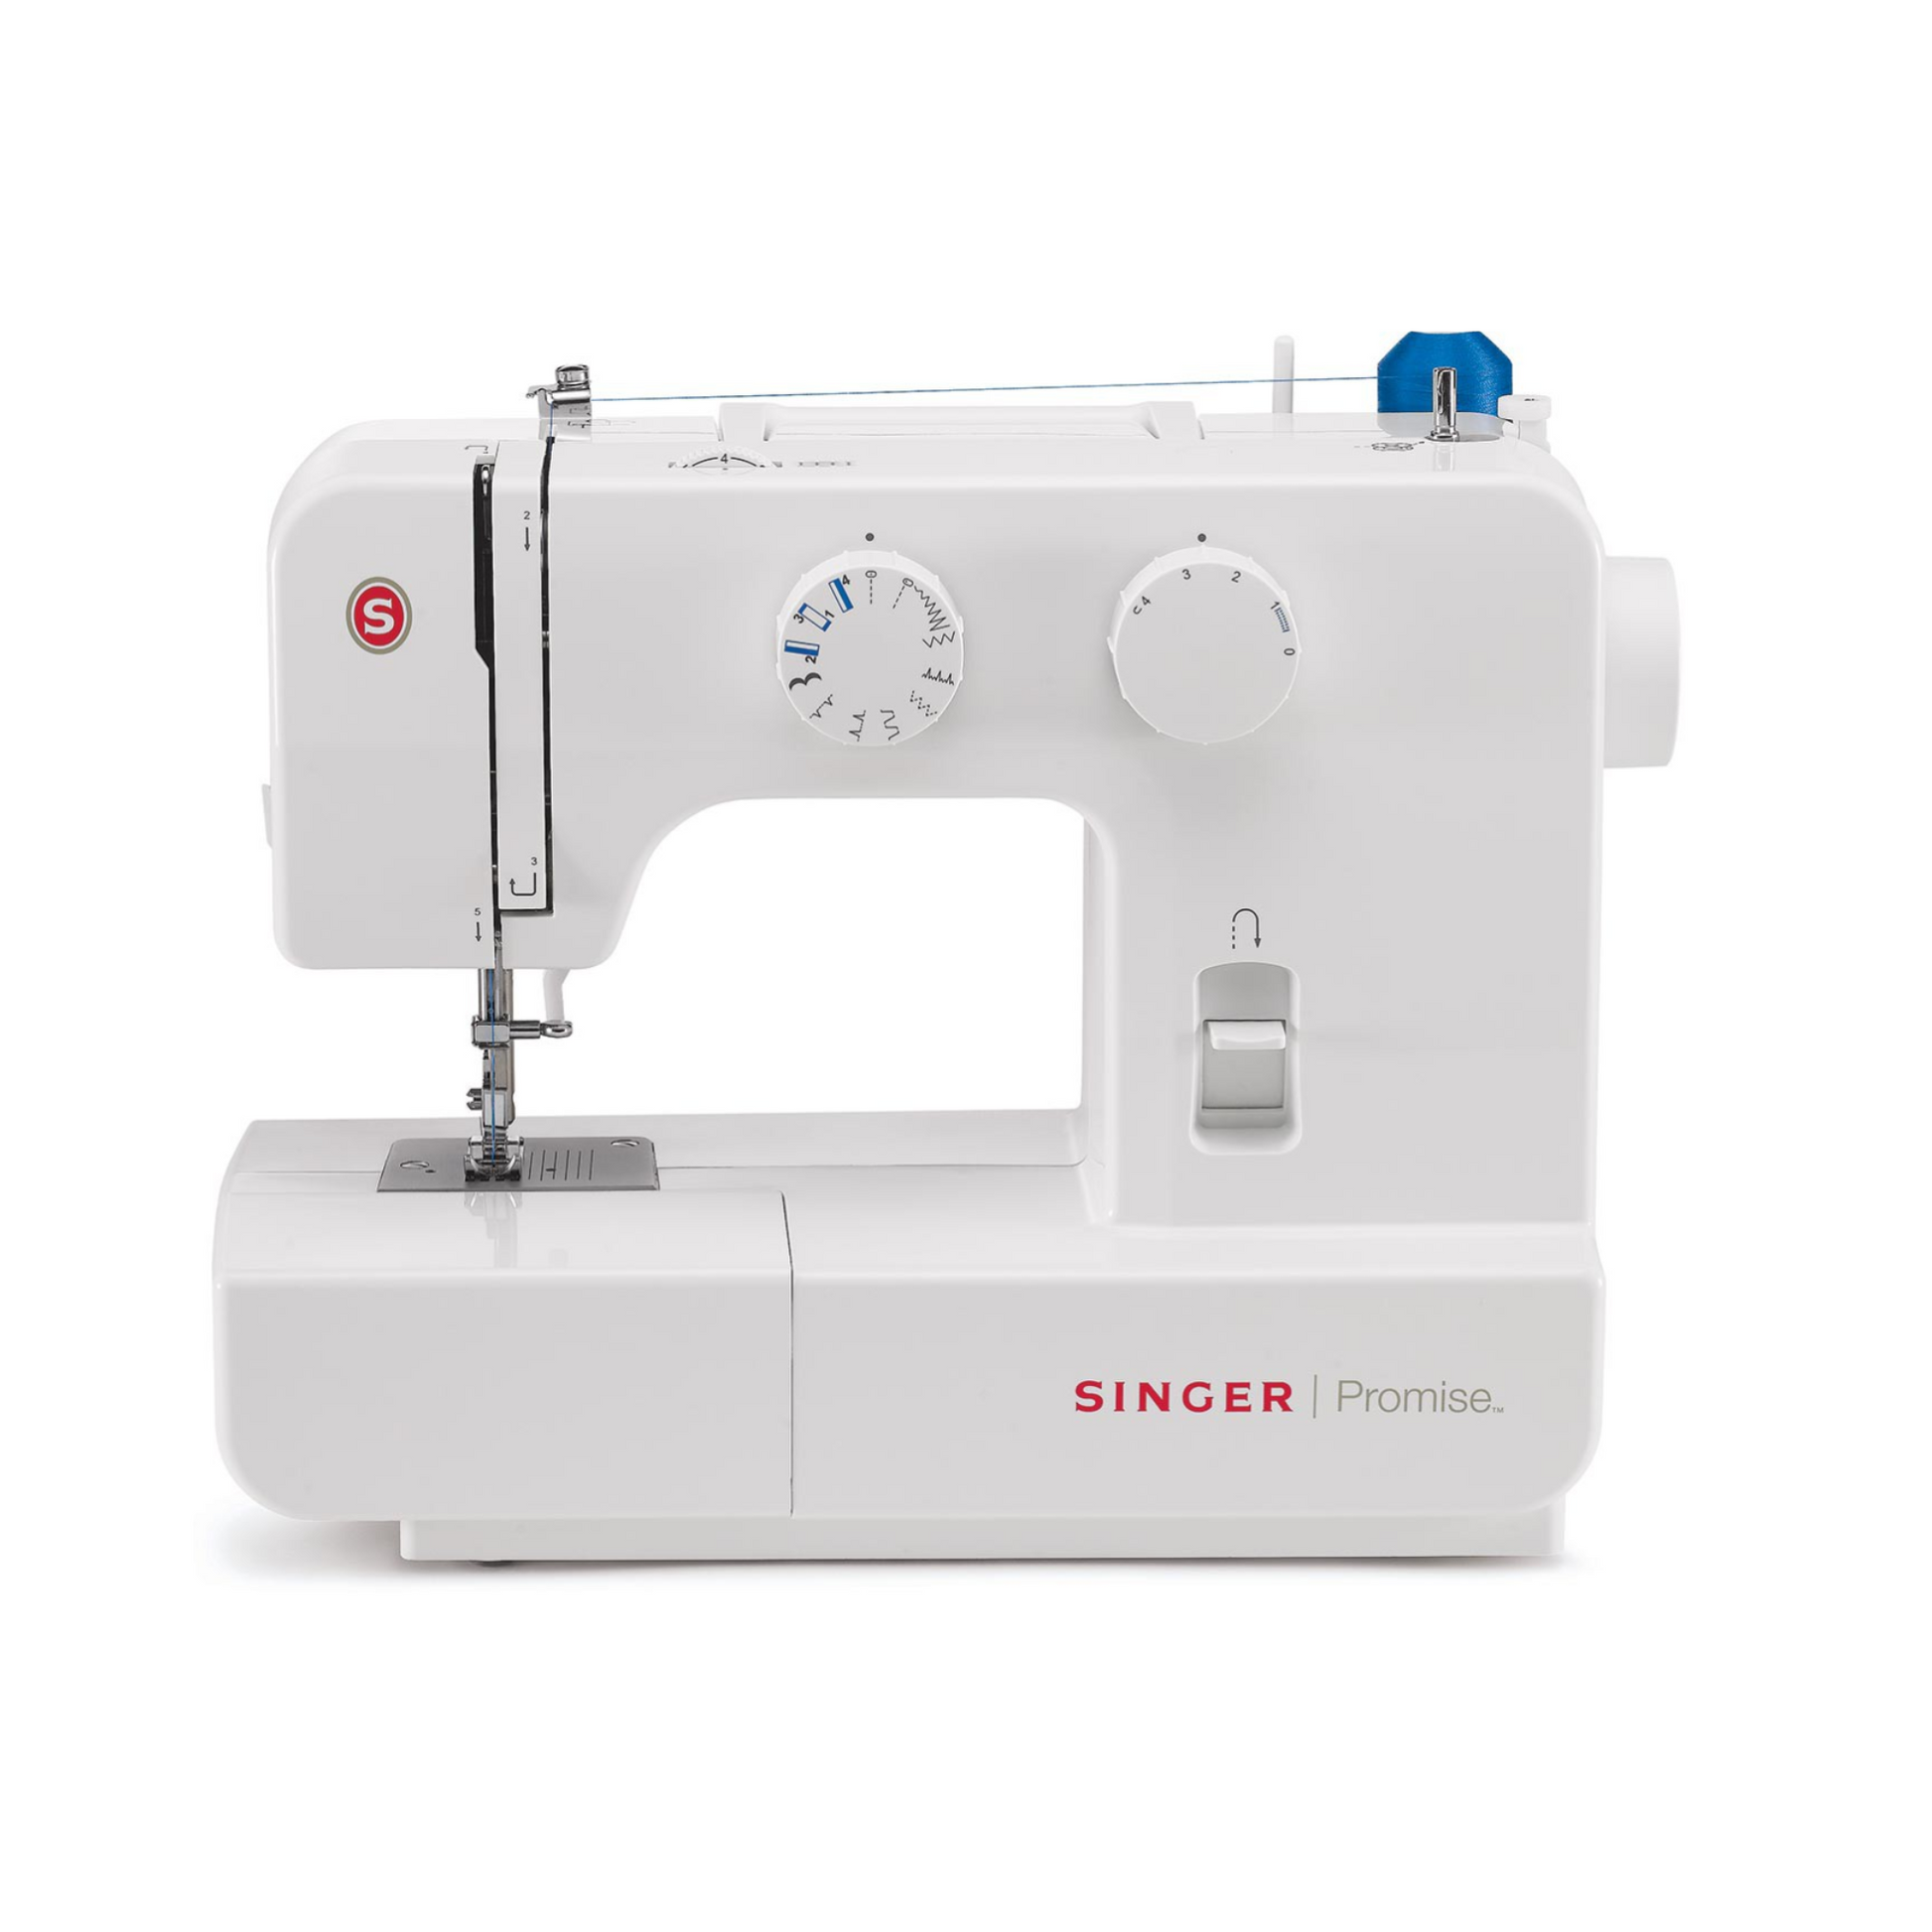 Singer promise 1409 - Sewing machine - White - Front view